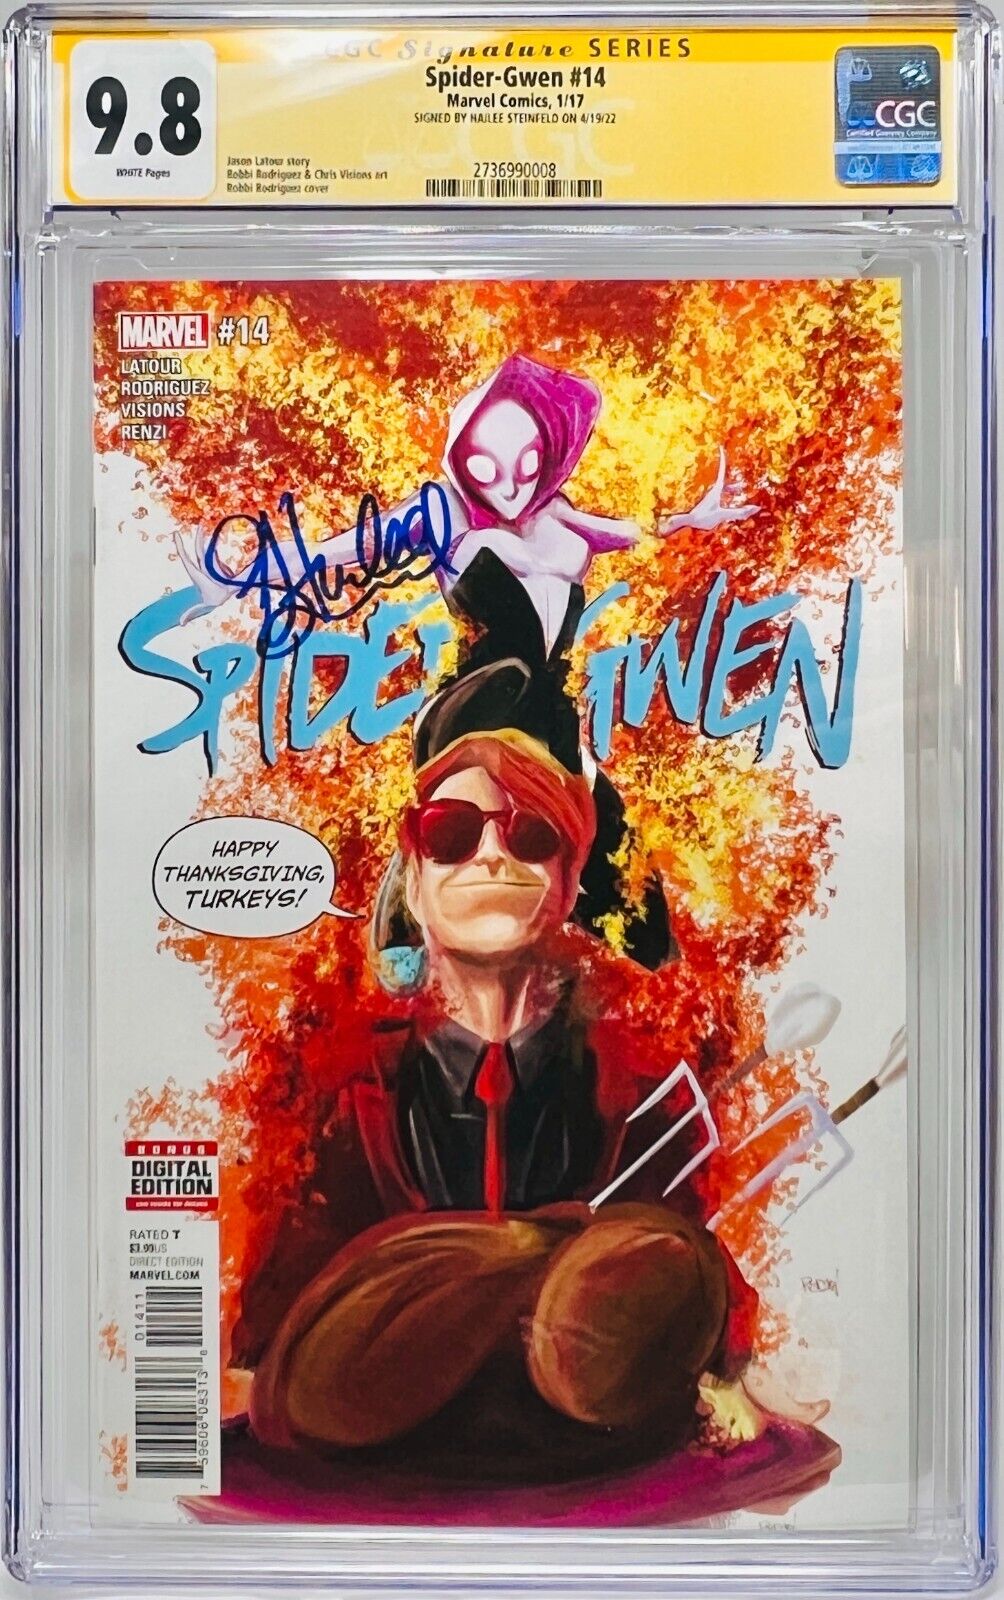 CGC Signature Series Graded 9.8 Spider-Gwen #14 Signed by Hailee Steinfeld